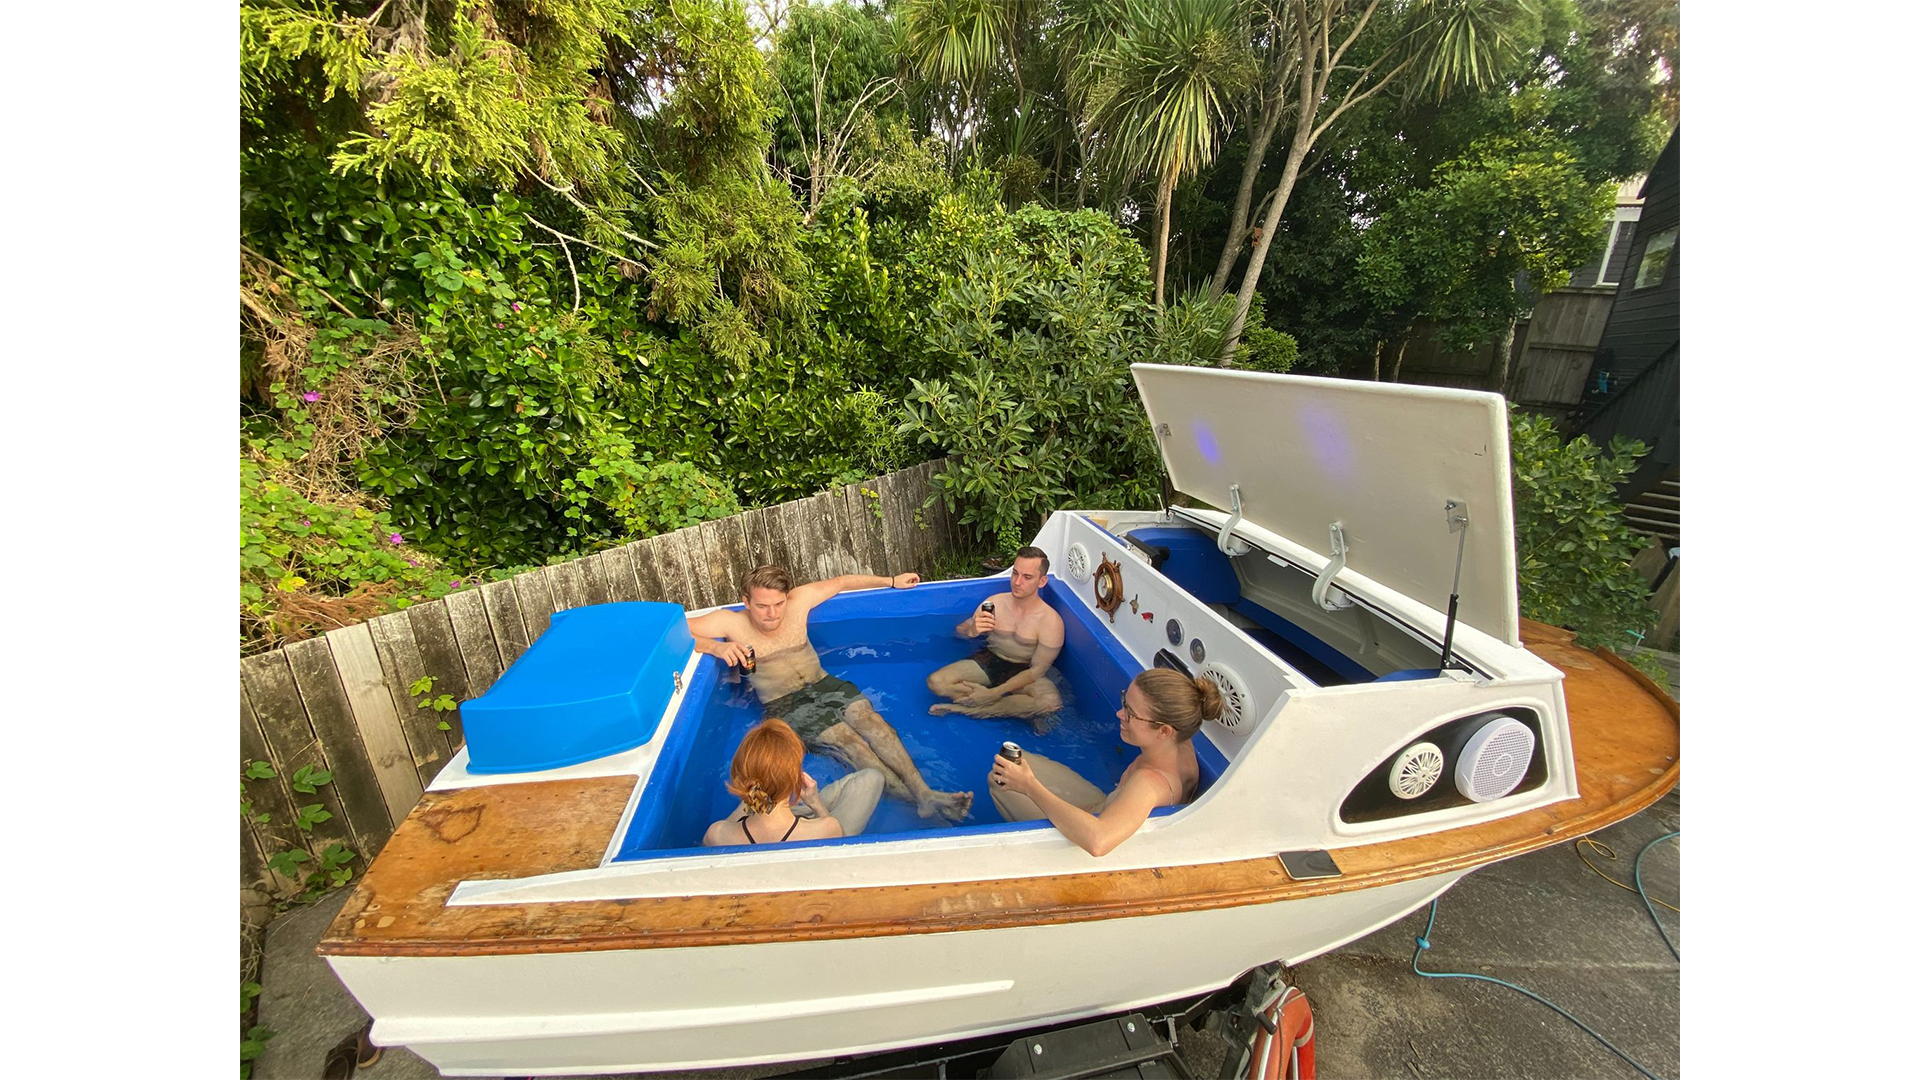 Creative 'spoat' spa crafted from a salvaged boat, featuring lights and a sound system.